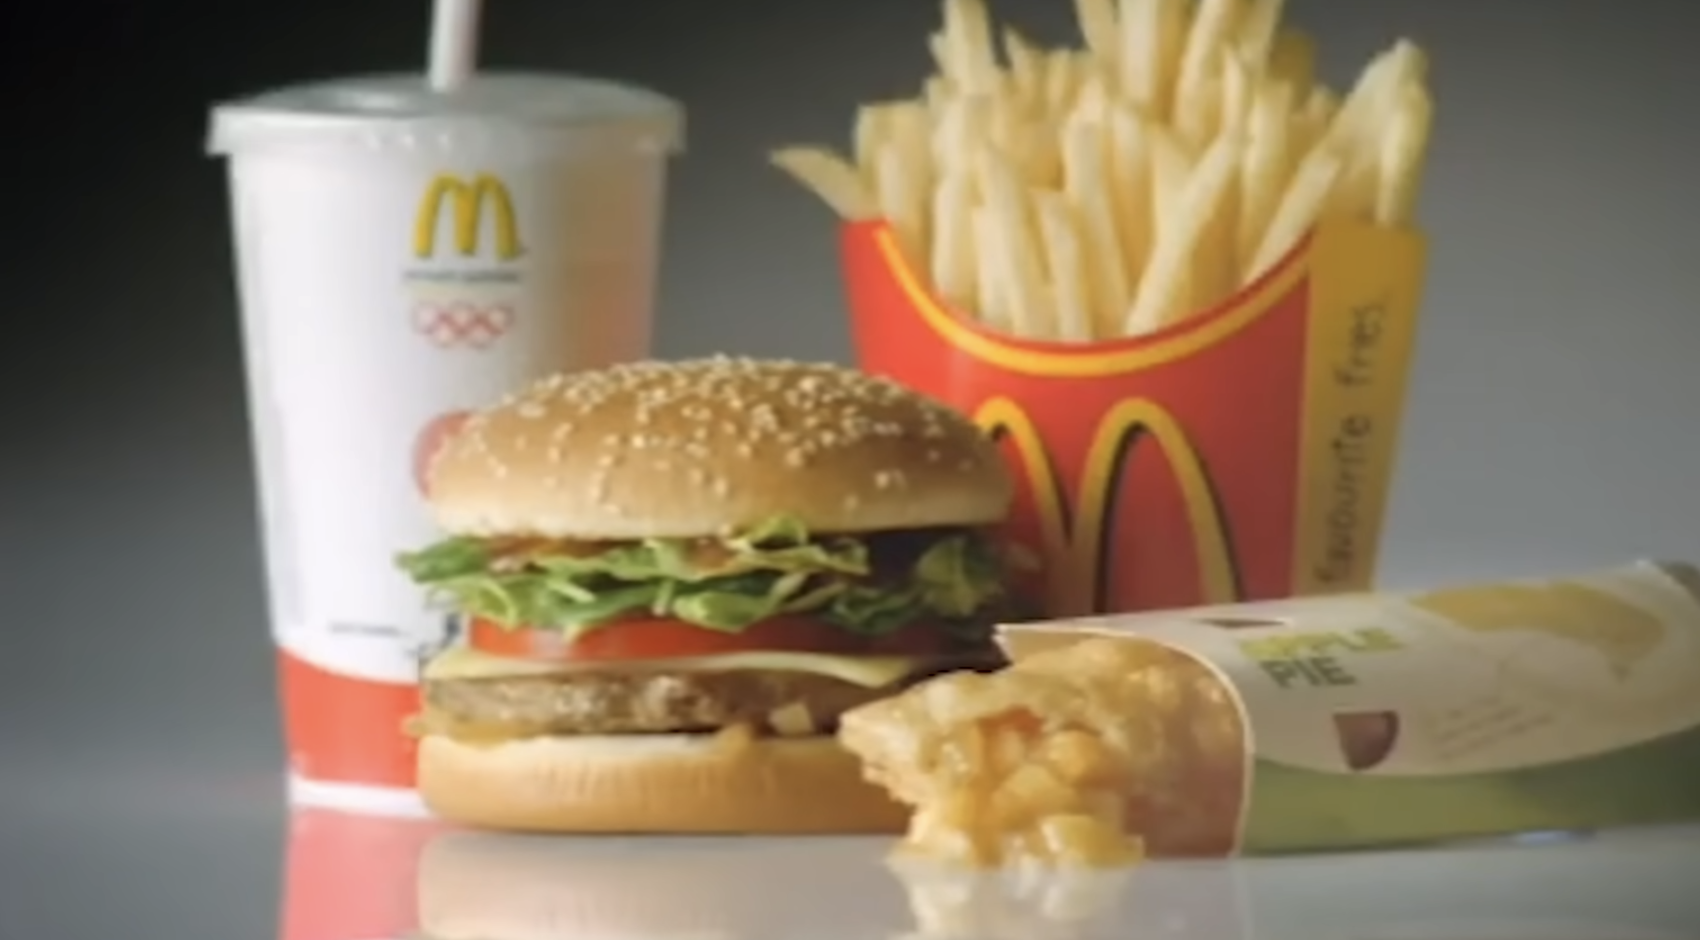 McDonald&#x27;s meal featuring a sesame seed hamburger, fries in a red container, apple pie, and a soft drink cup